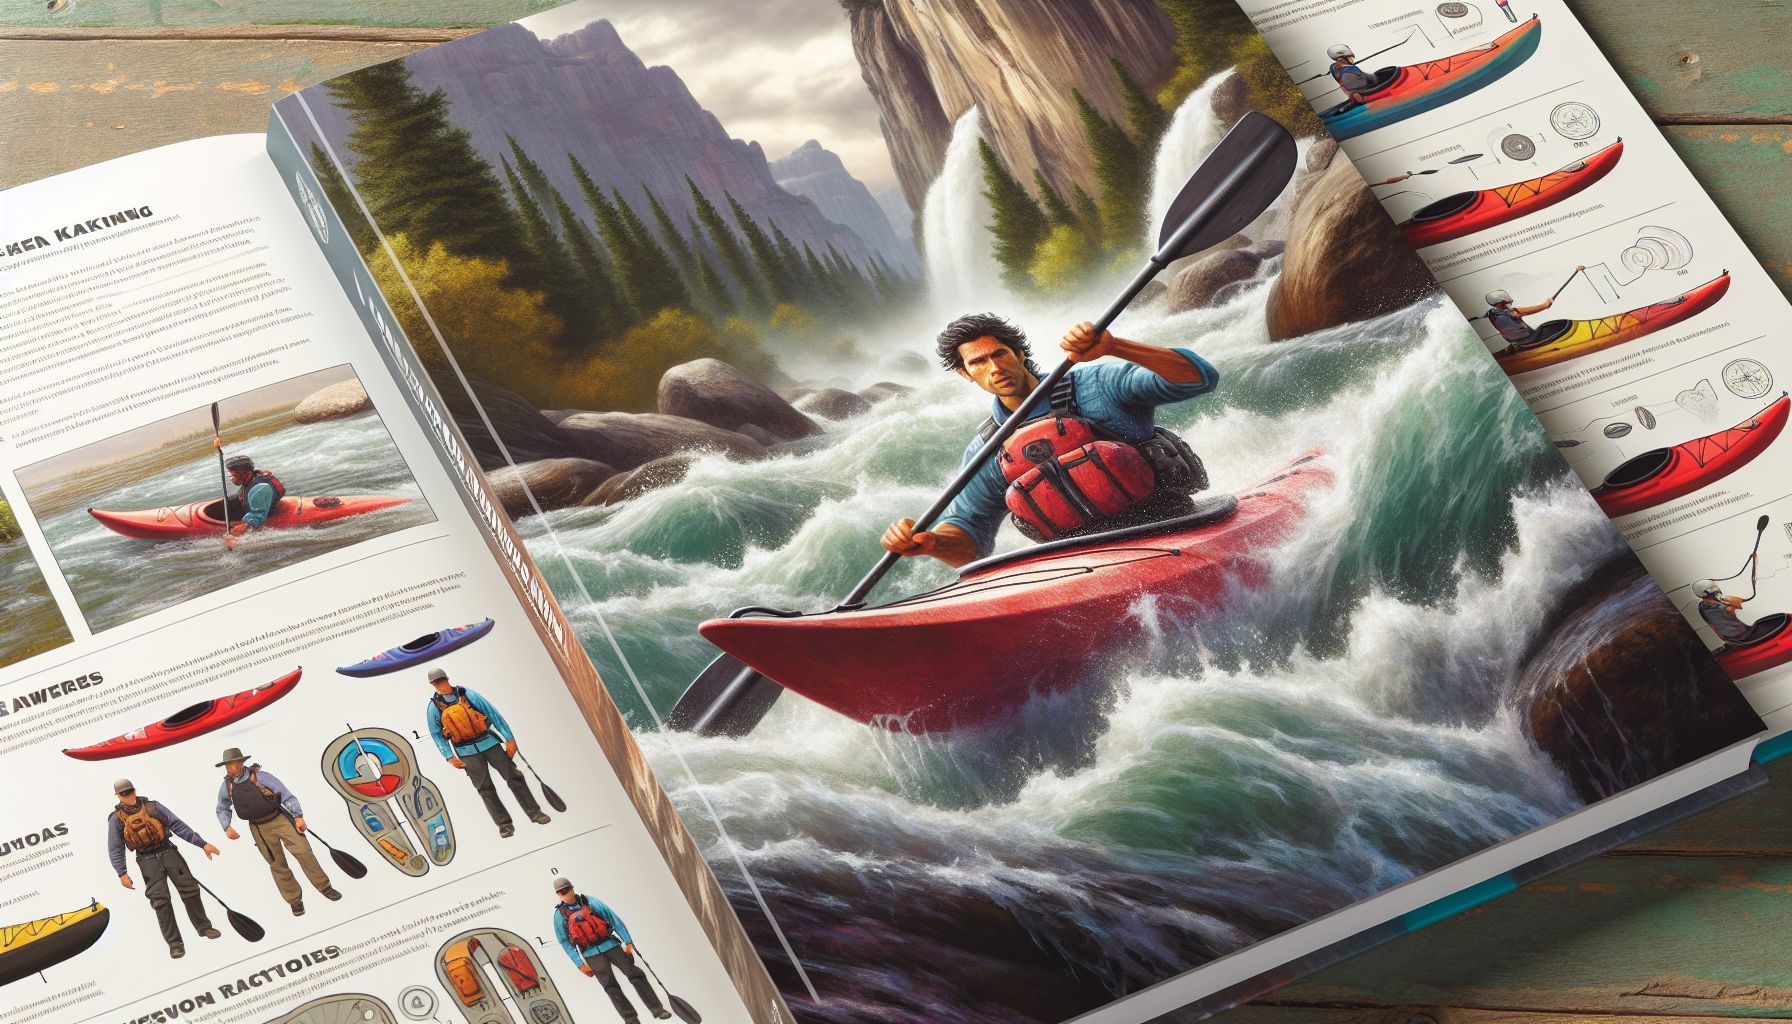 The Thrilling World of Whitewater Kayaking: An In-Depth Guide to Taming the Rapids